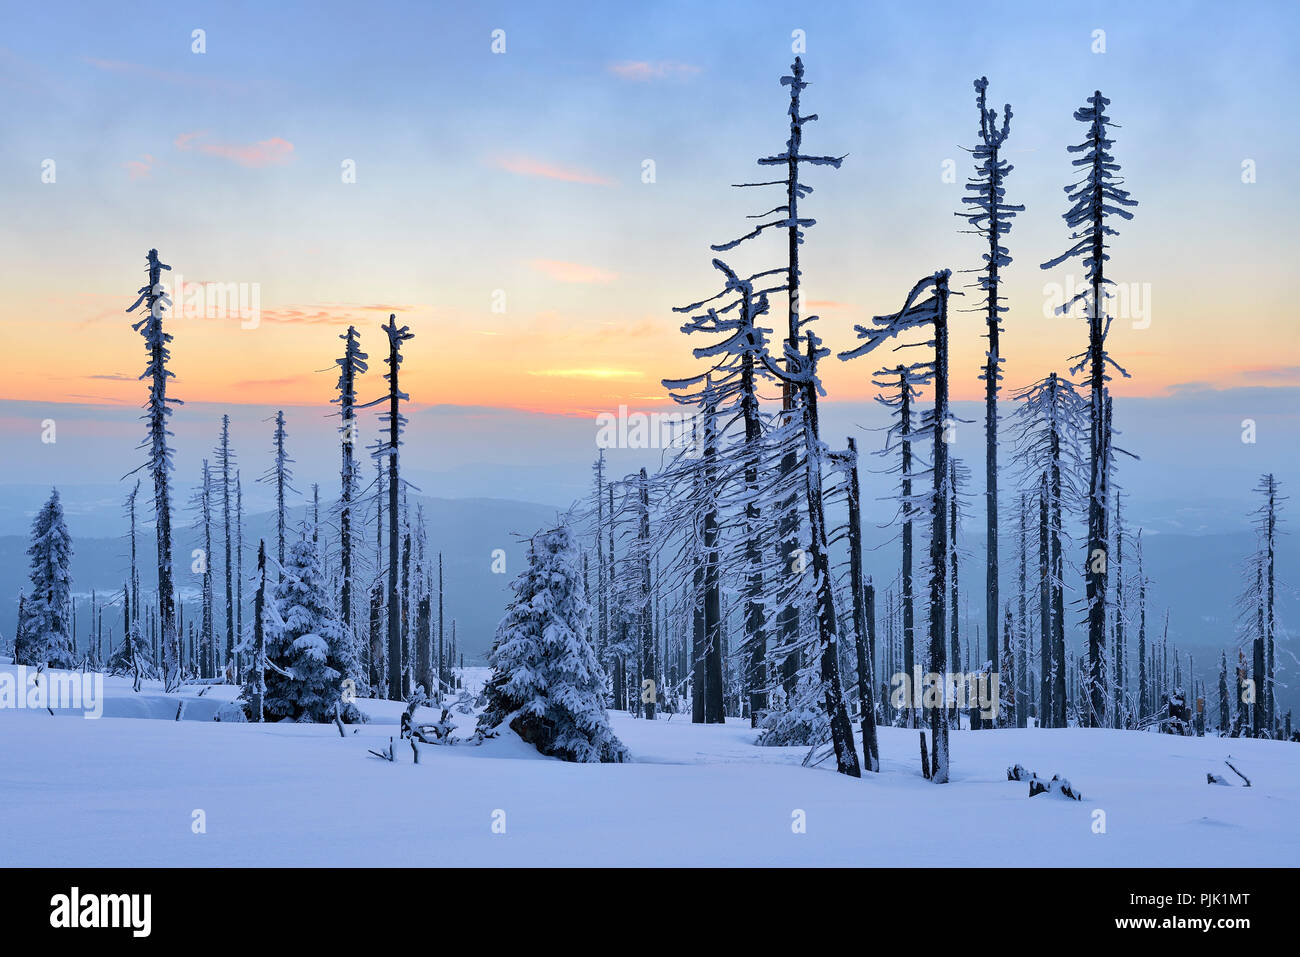 Sunset on the mountain Great Rachel in winter, spruce covered with snow and dead by bark beetle infestation, Bavarian Forest nature park, Bavaria, Germany Stock Photo